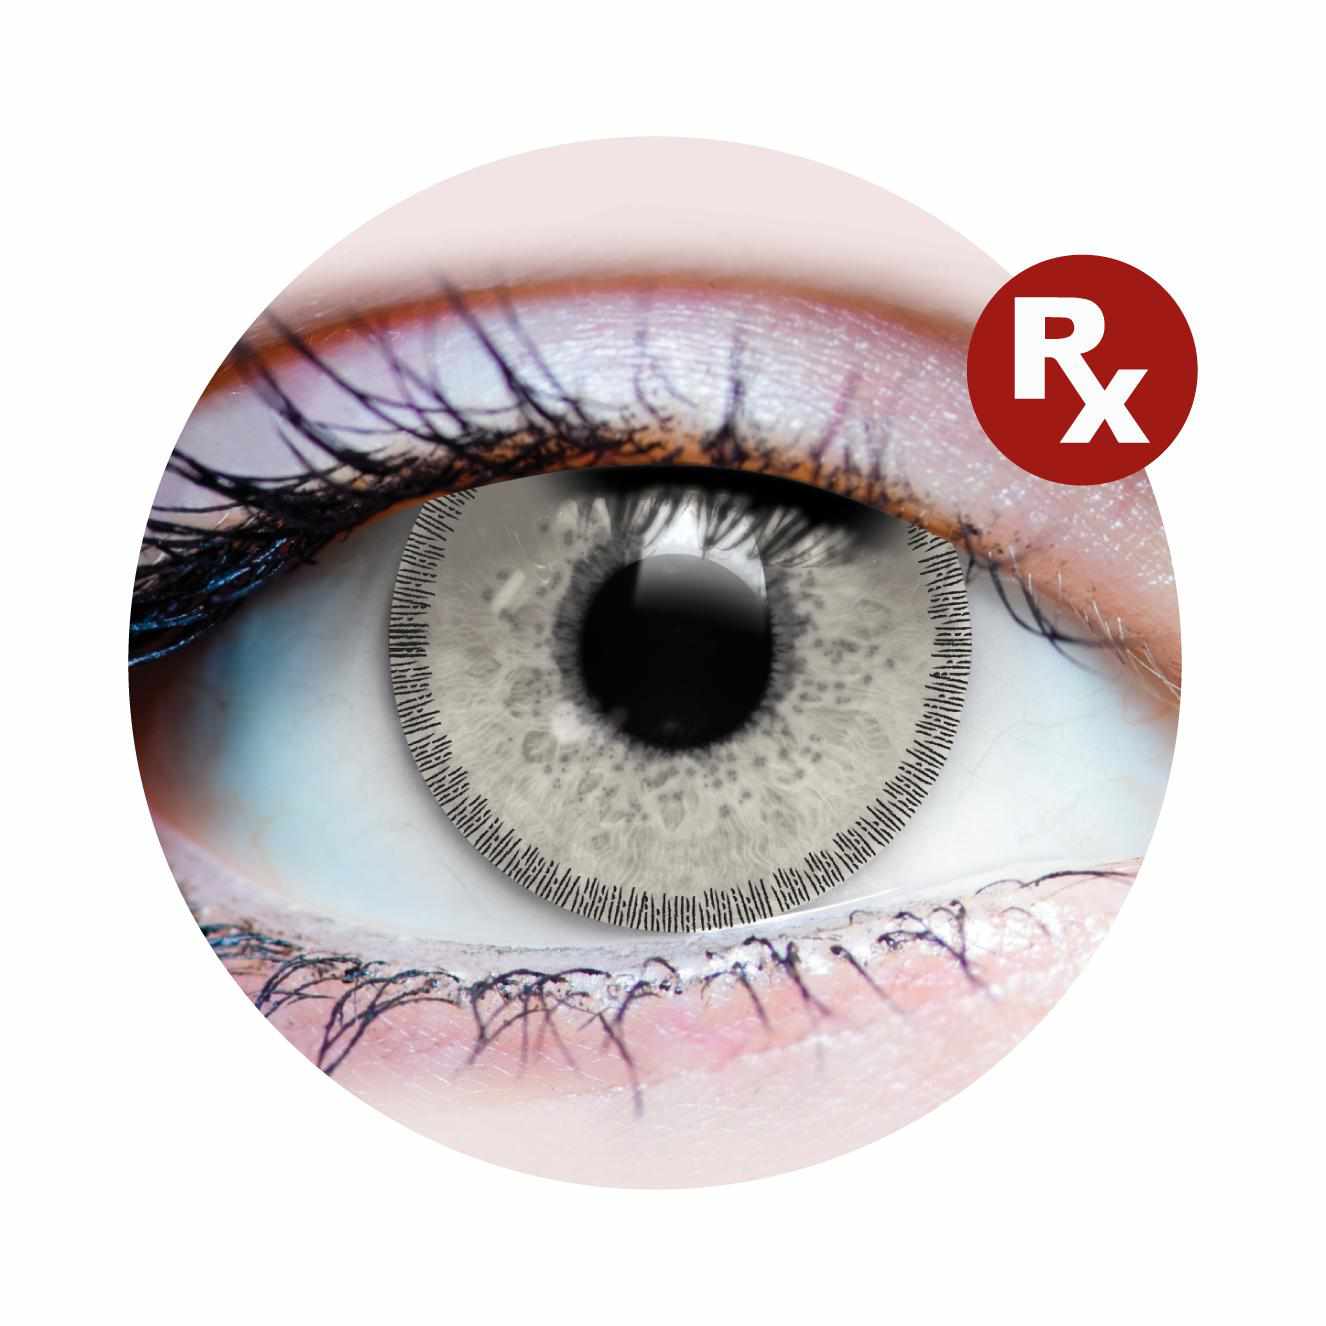 White colored contact lenses, coloured contact lenses, color contacts, circle lens.